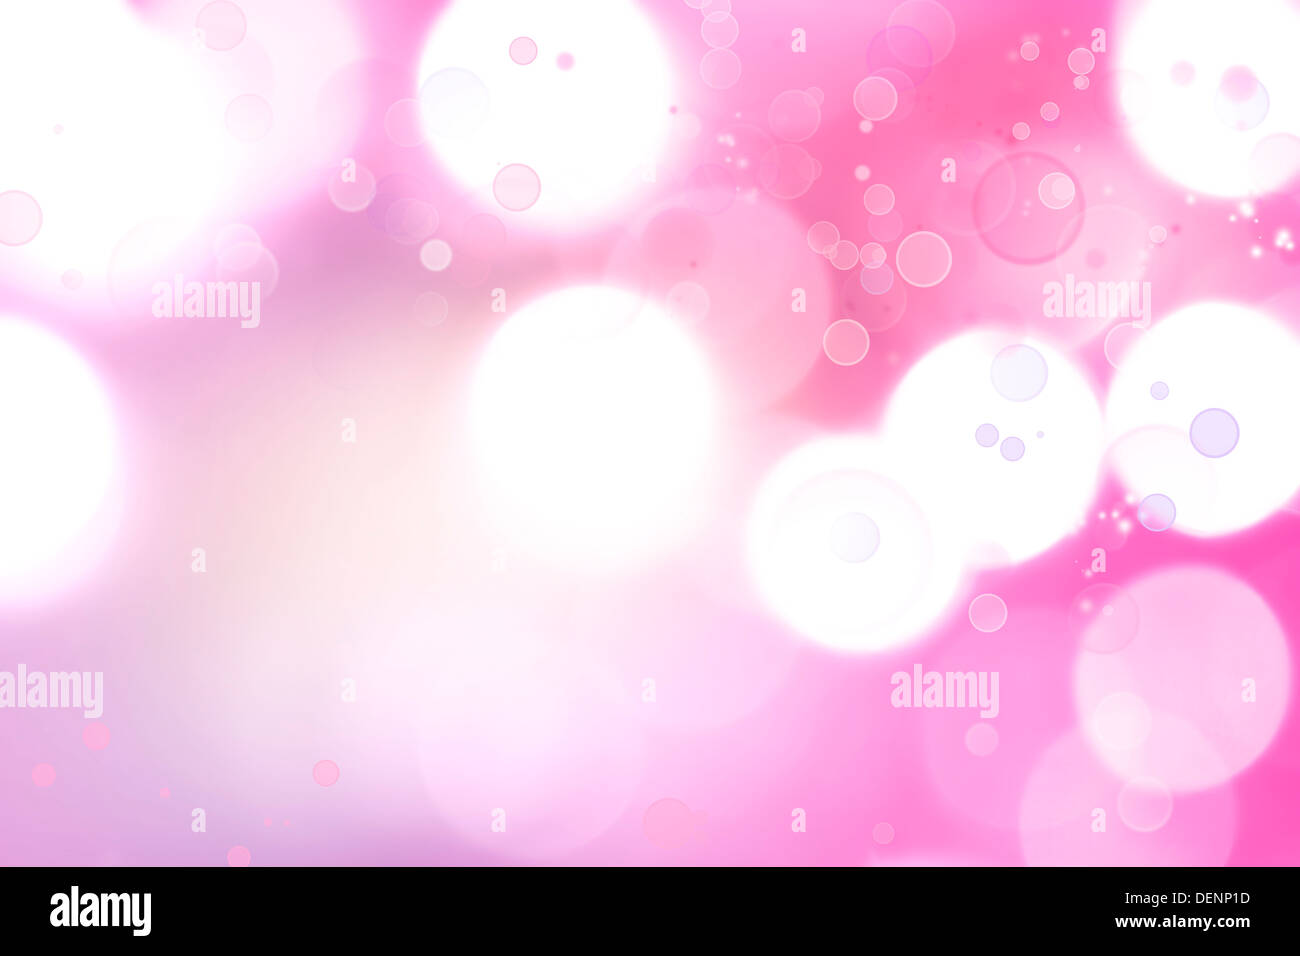 Abstract pink tone lights background Stock Photo